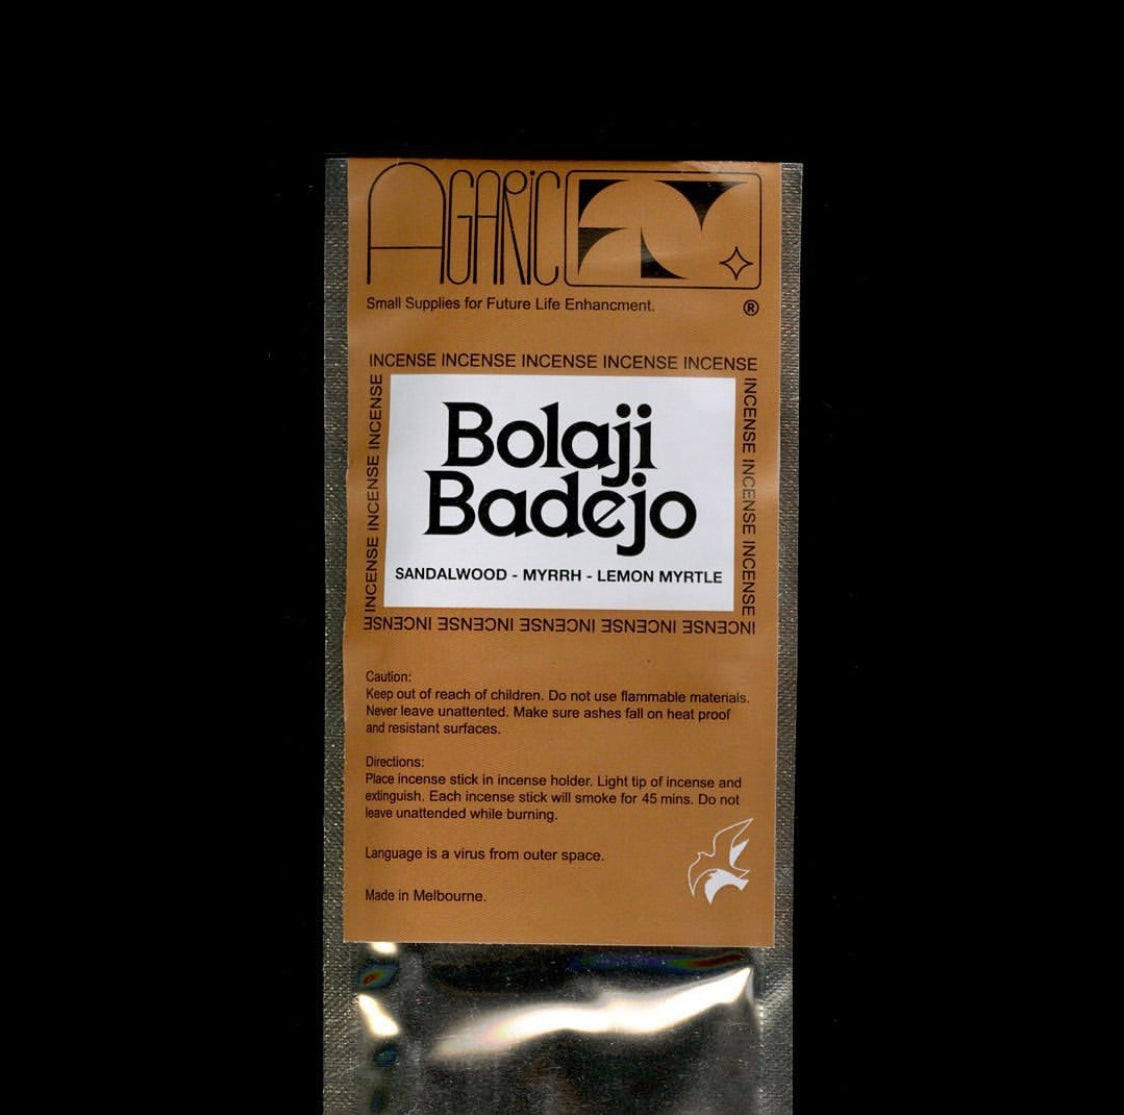 SOLD OUT – Agaric Fly Bolaji Badejo Incense